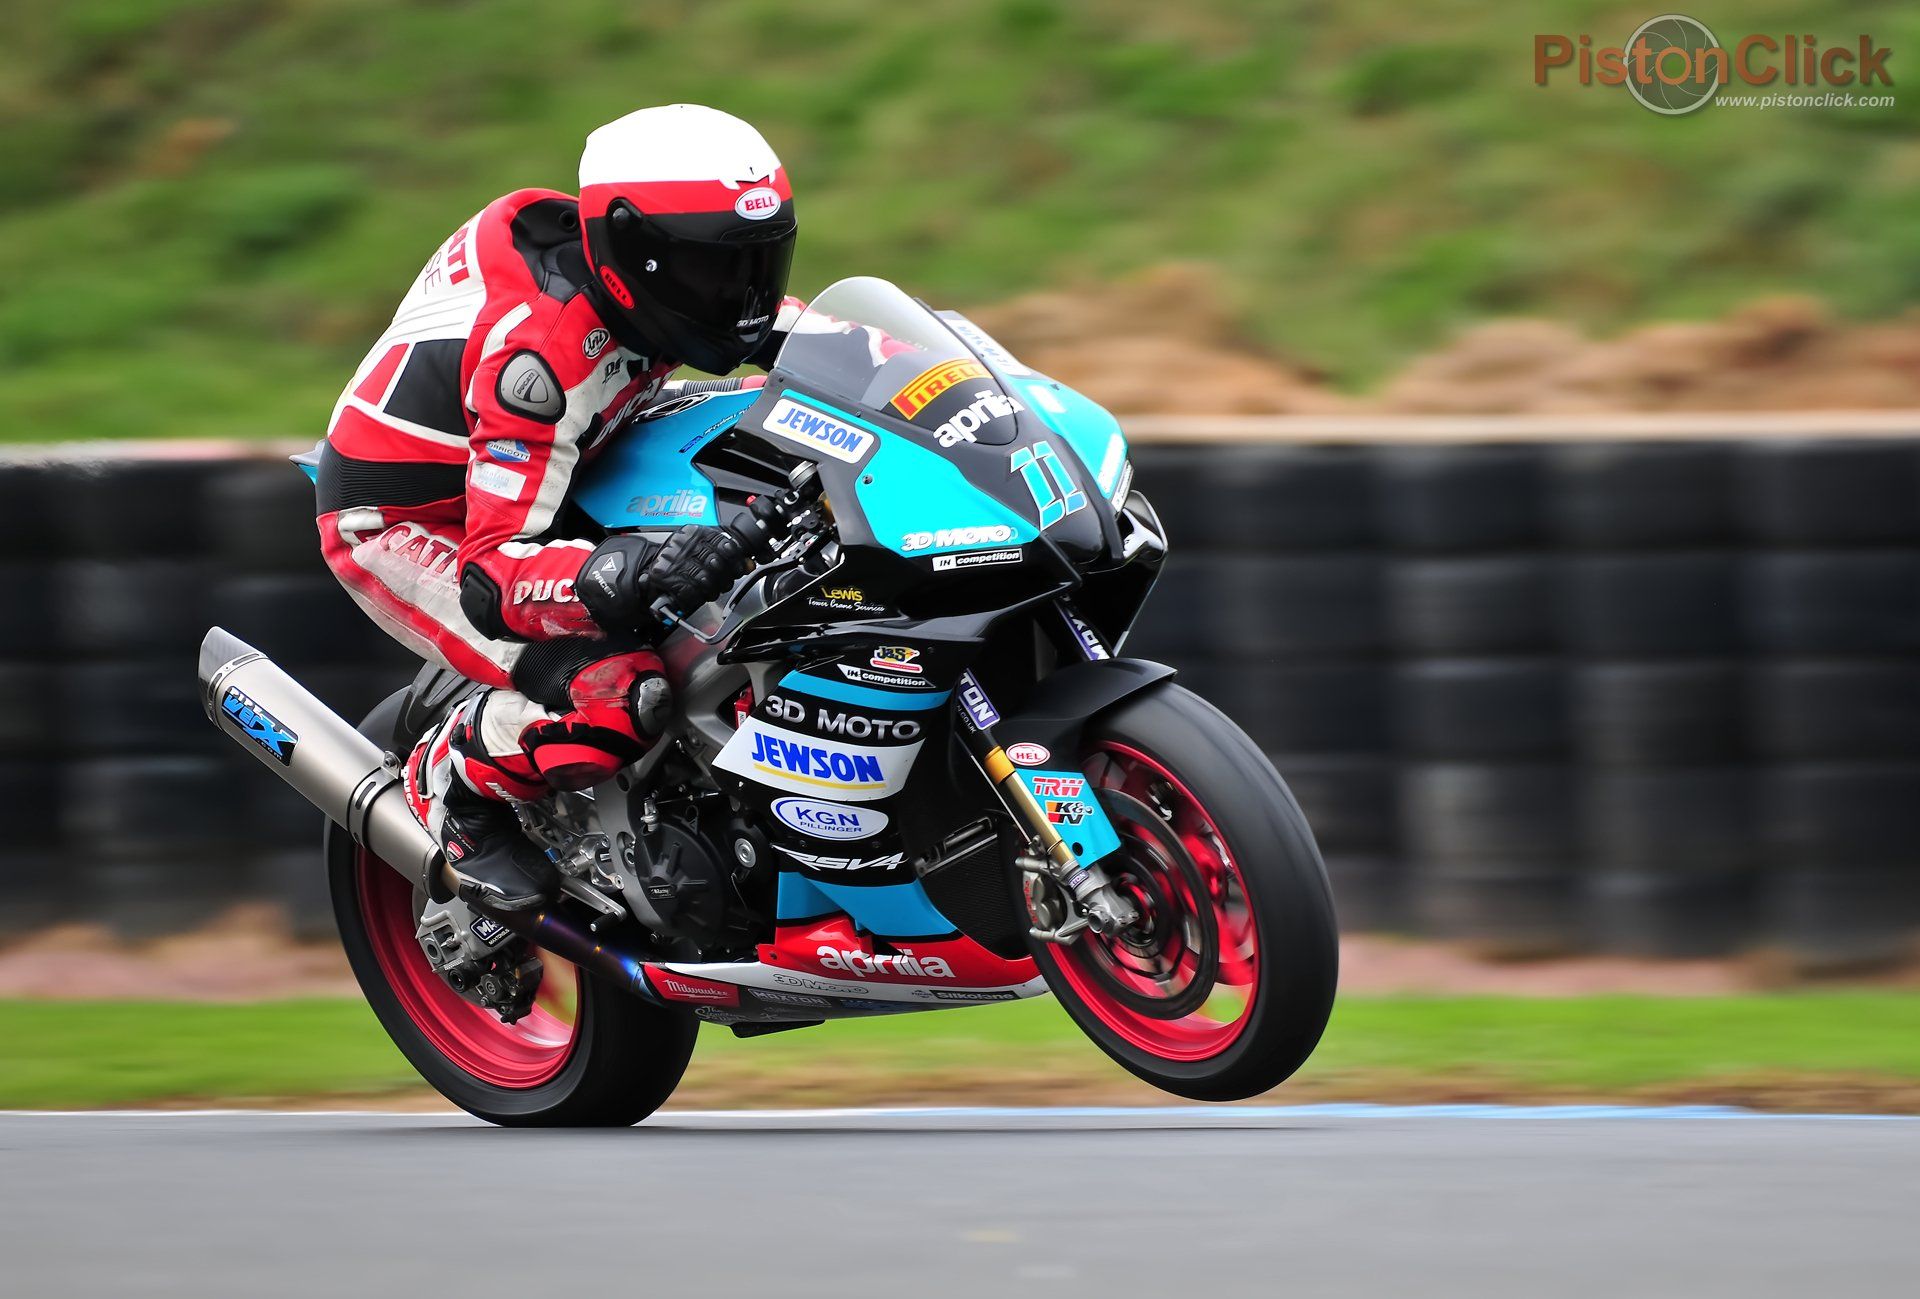 Race of the Year Mallory Park